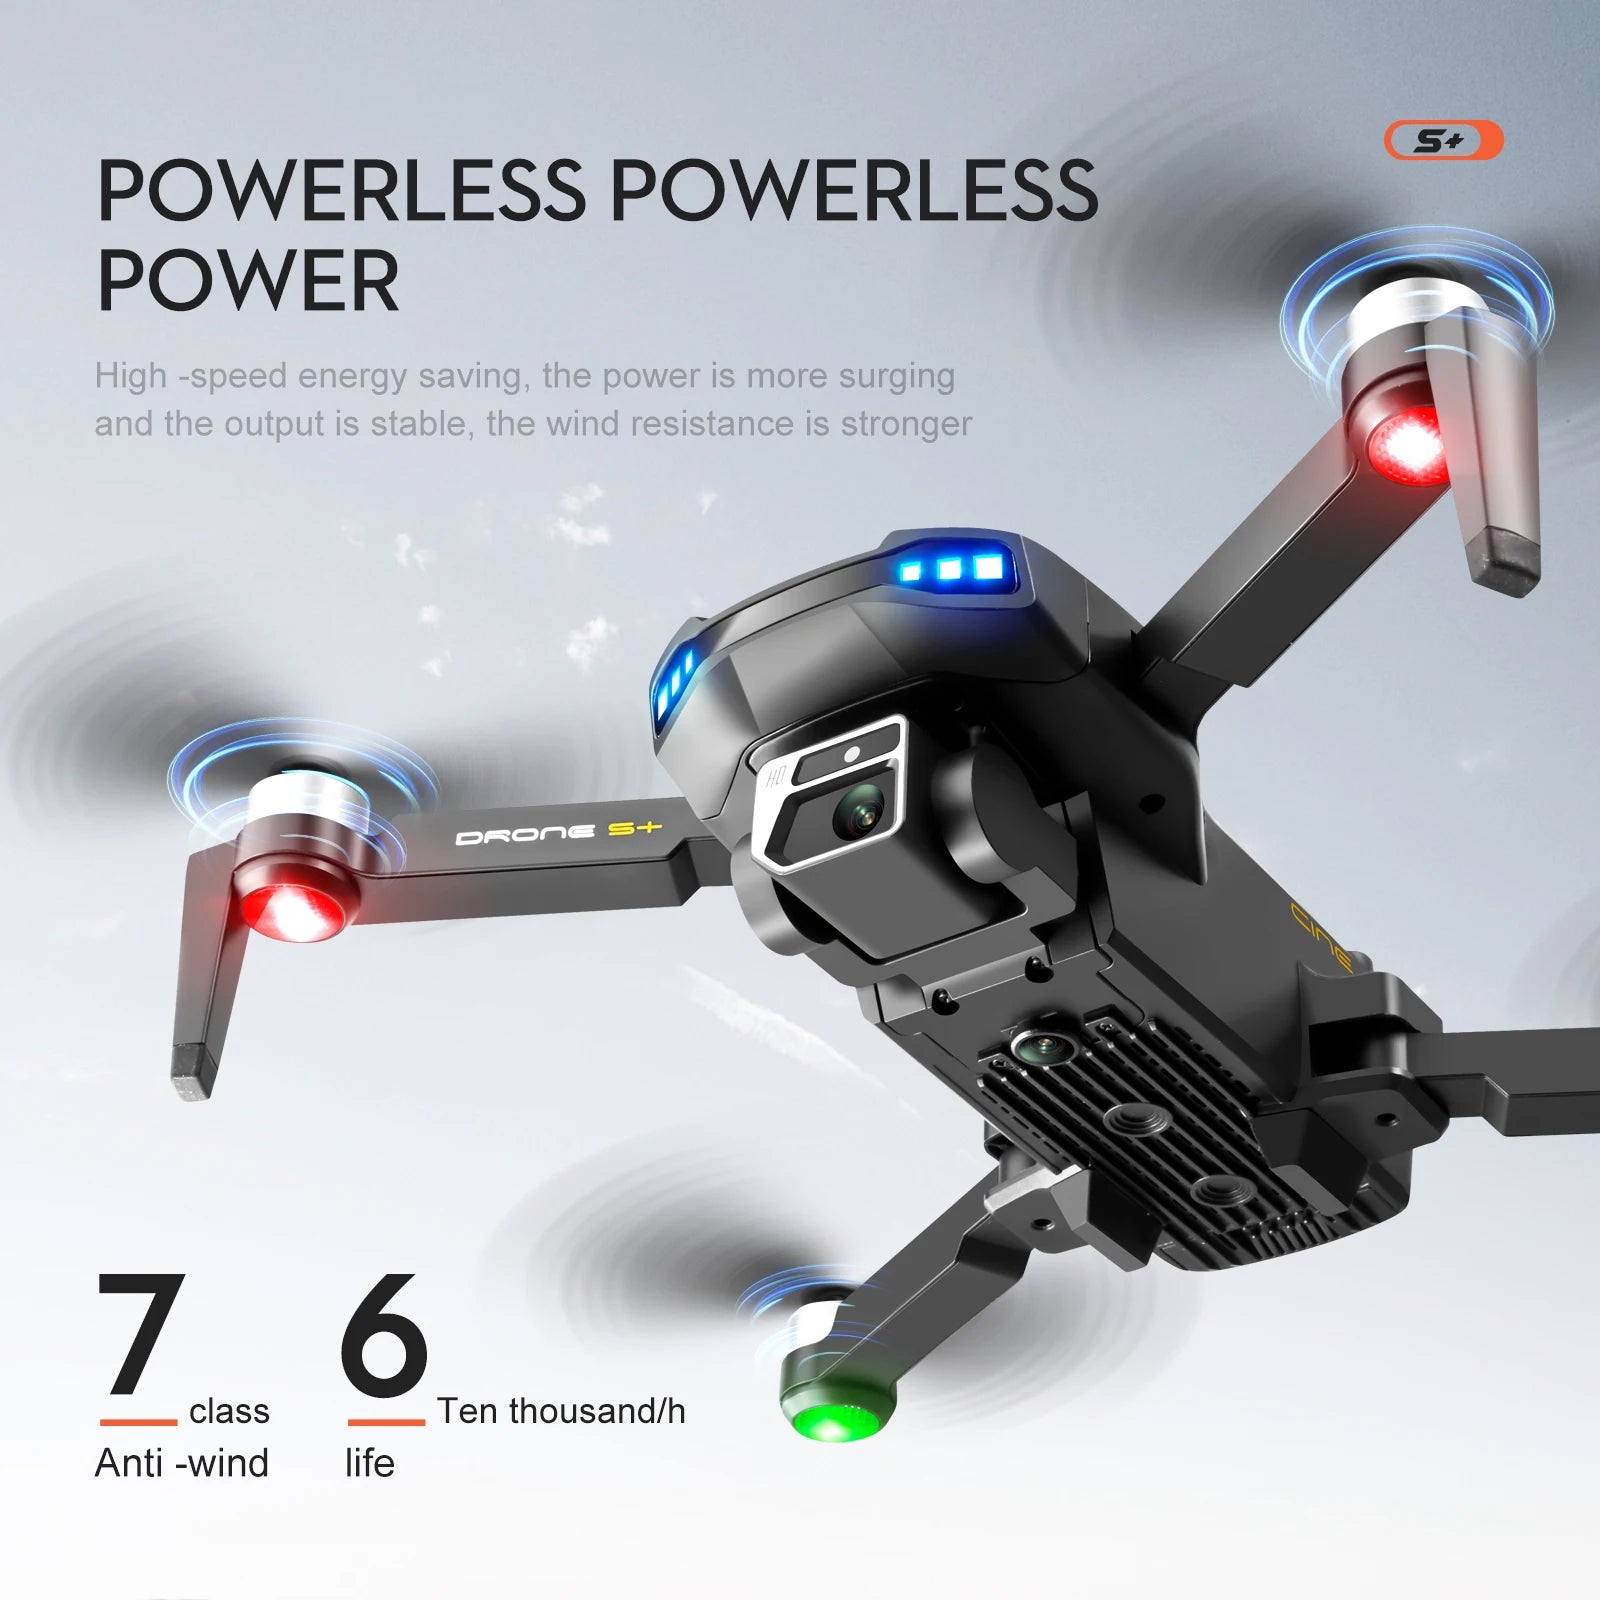 S+ GPS Drone, DRONG 55 class Ten thousand/h Anti-wind life, the power is more sur